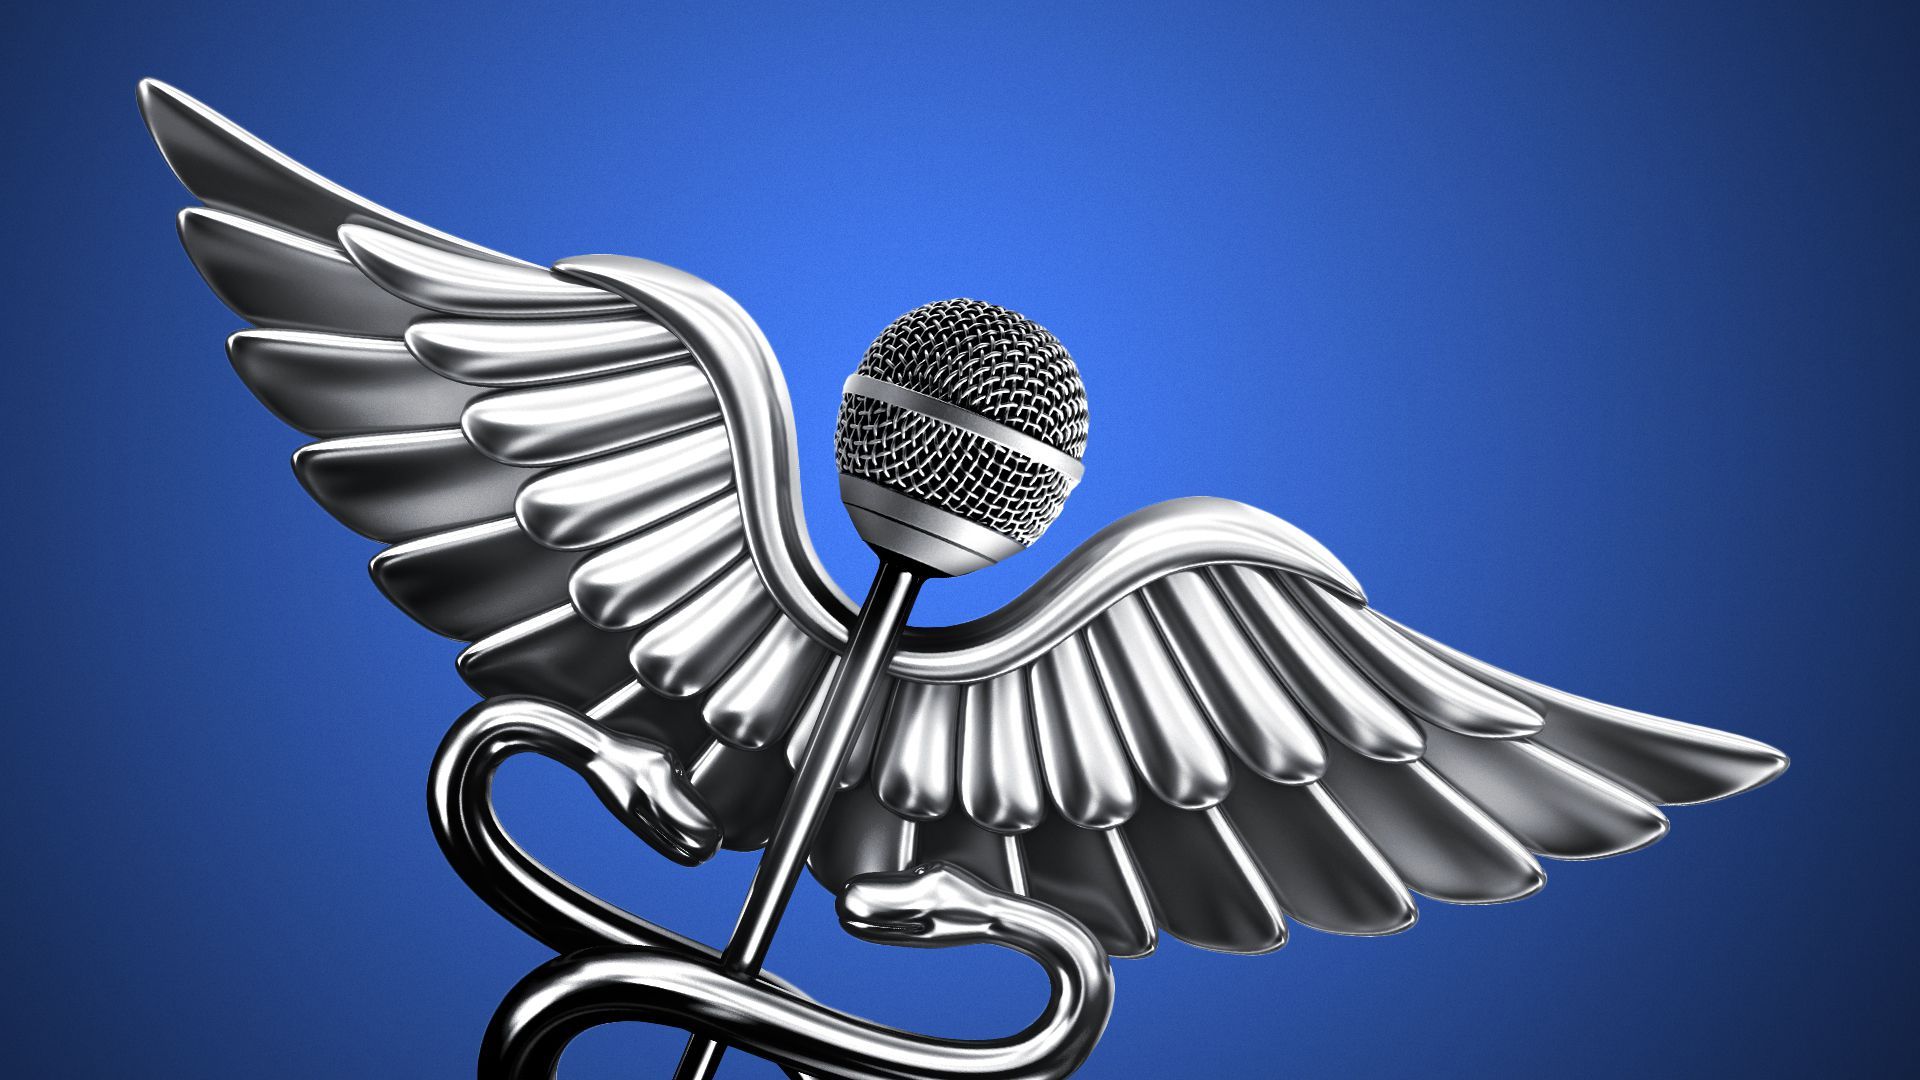 Illustration of a caduceus combined with a microphone at the top